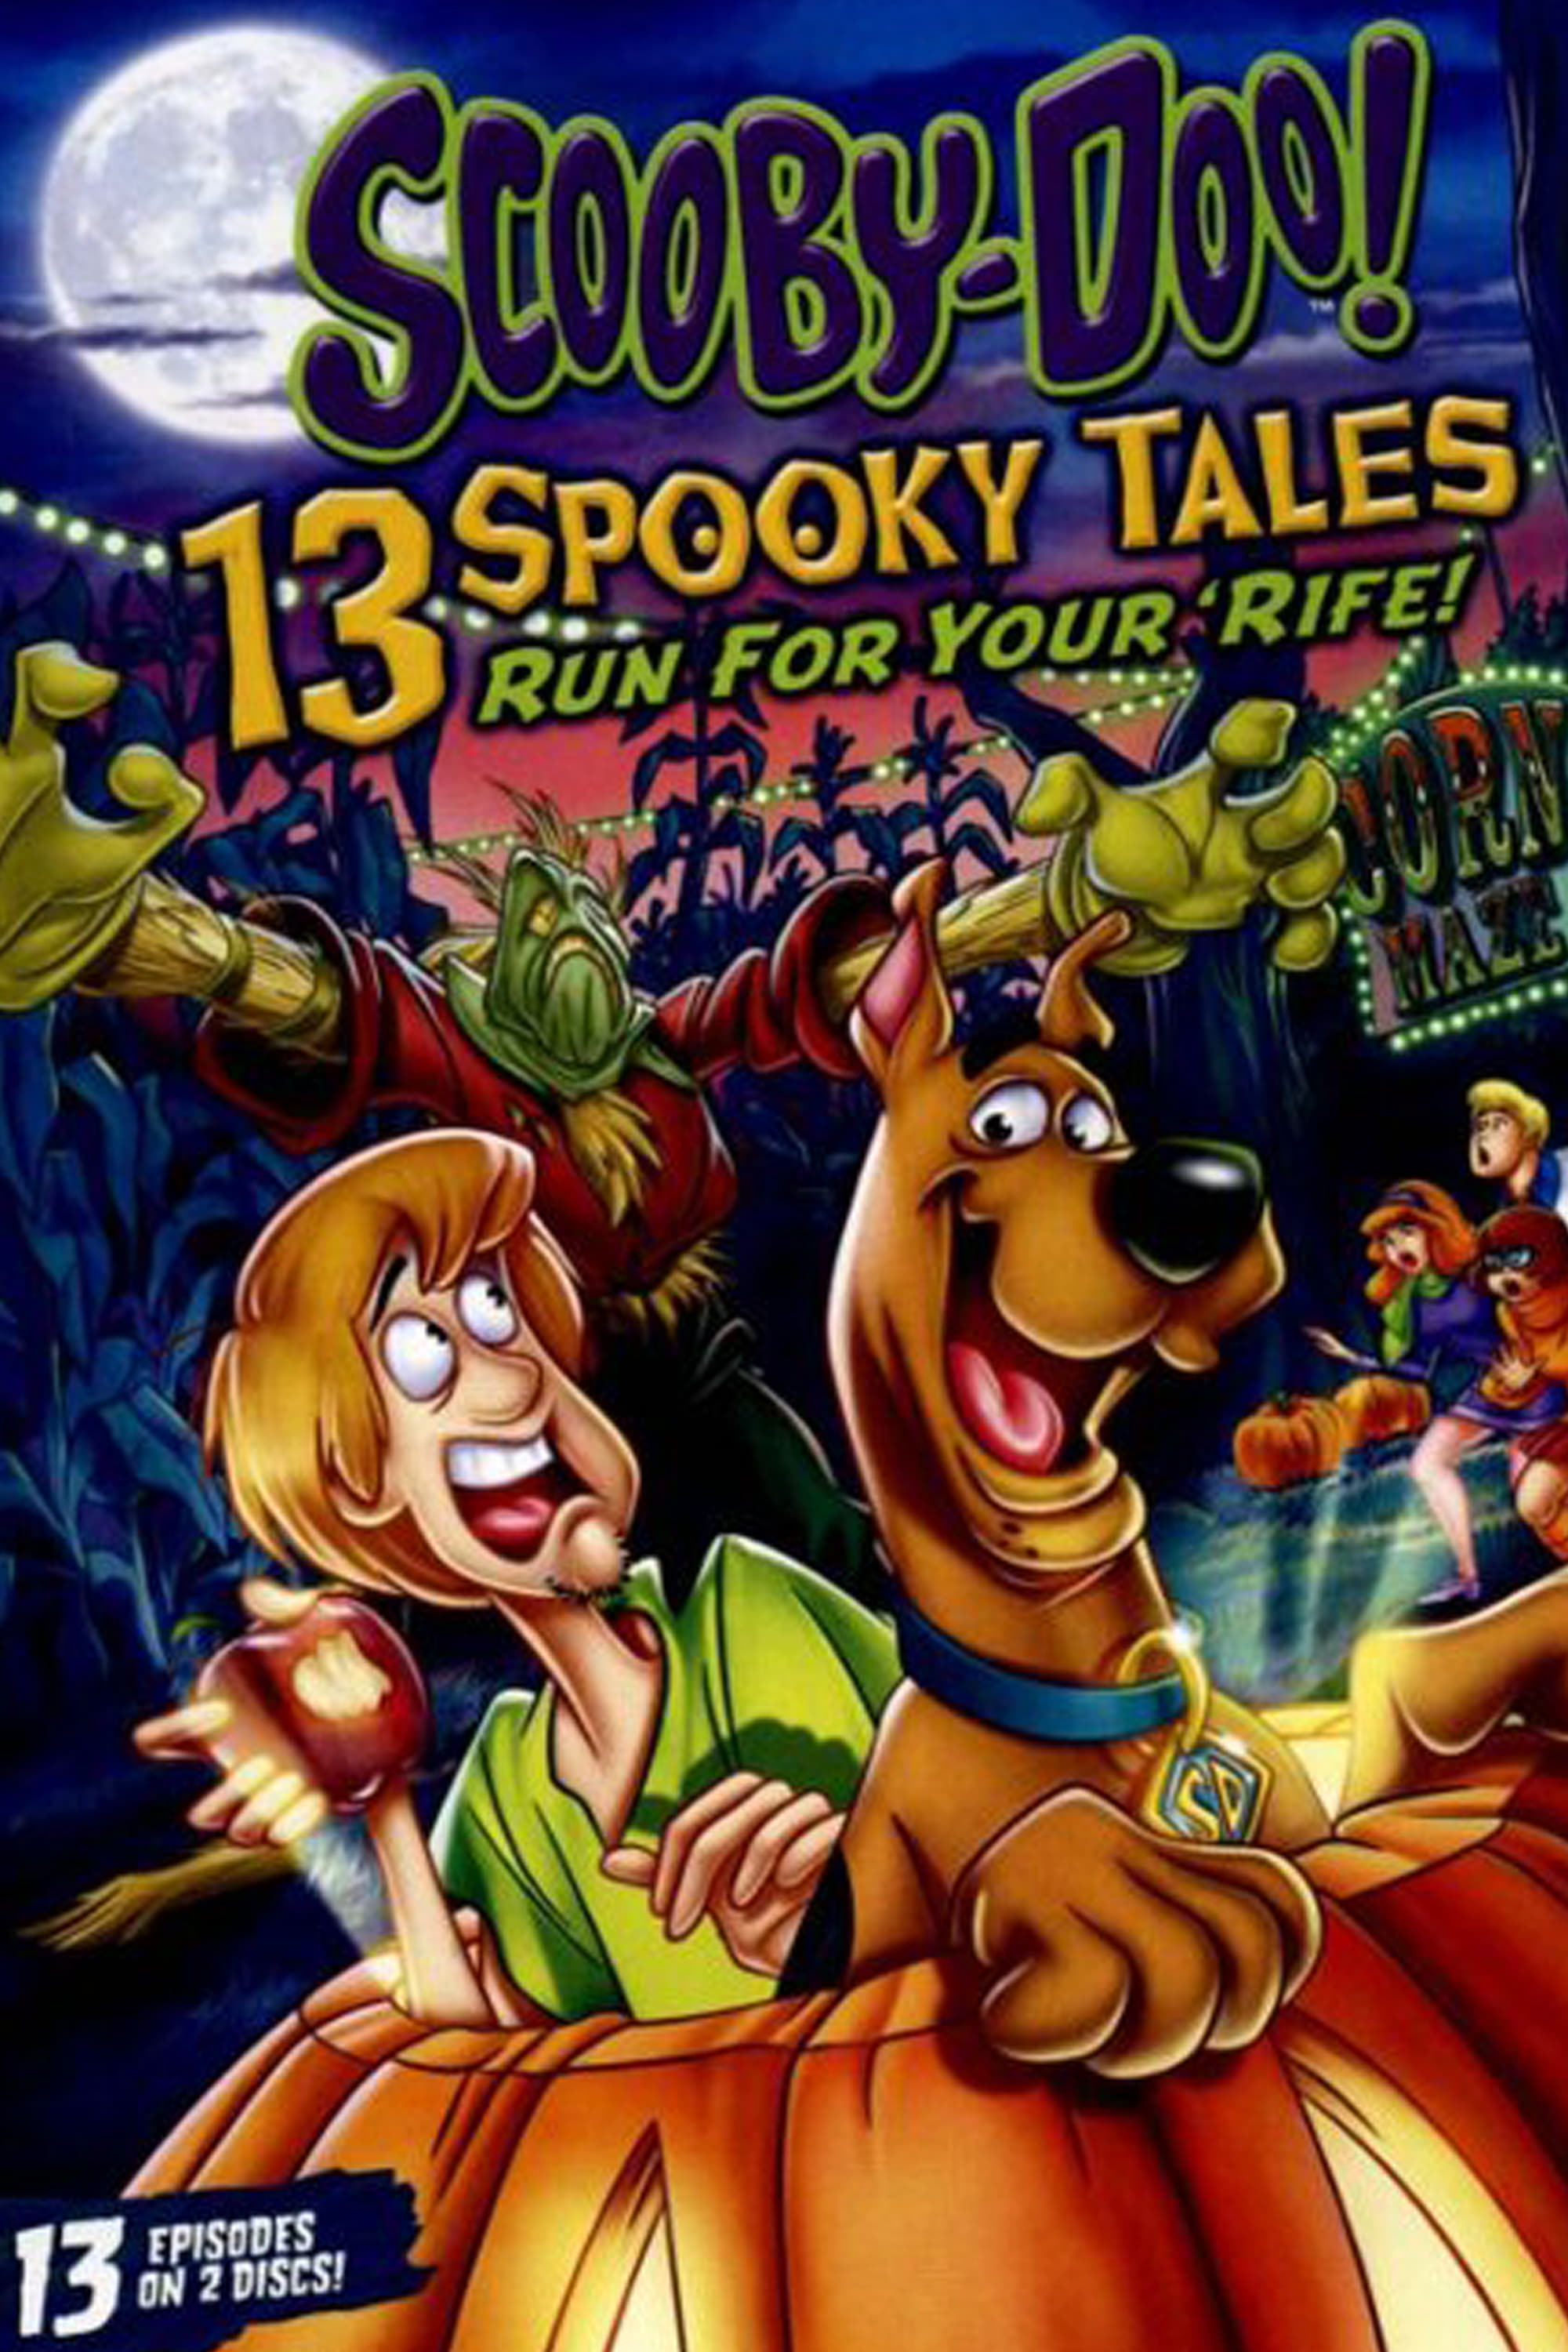 Scooby-Doo: 13 Spooky Tales Run for Your 'Rife!